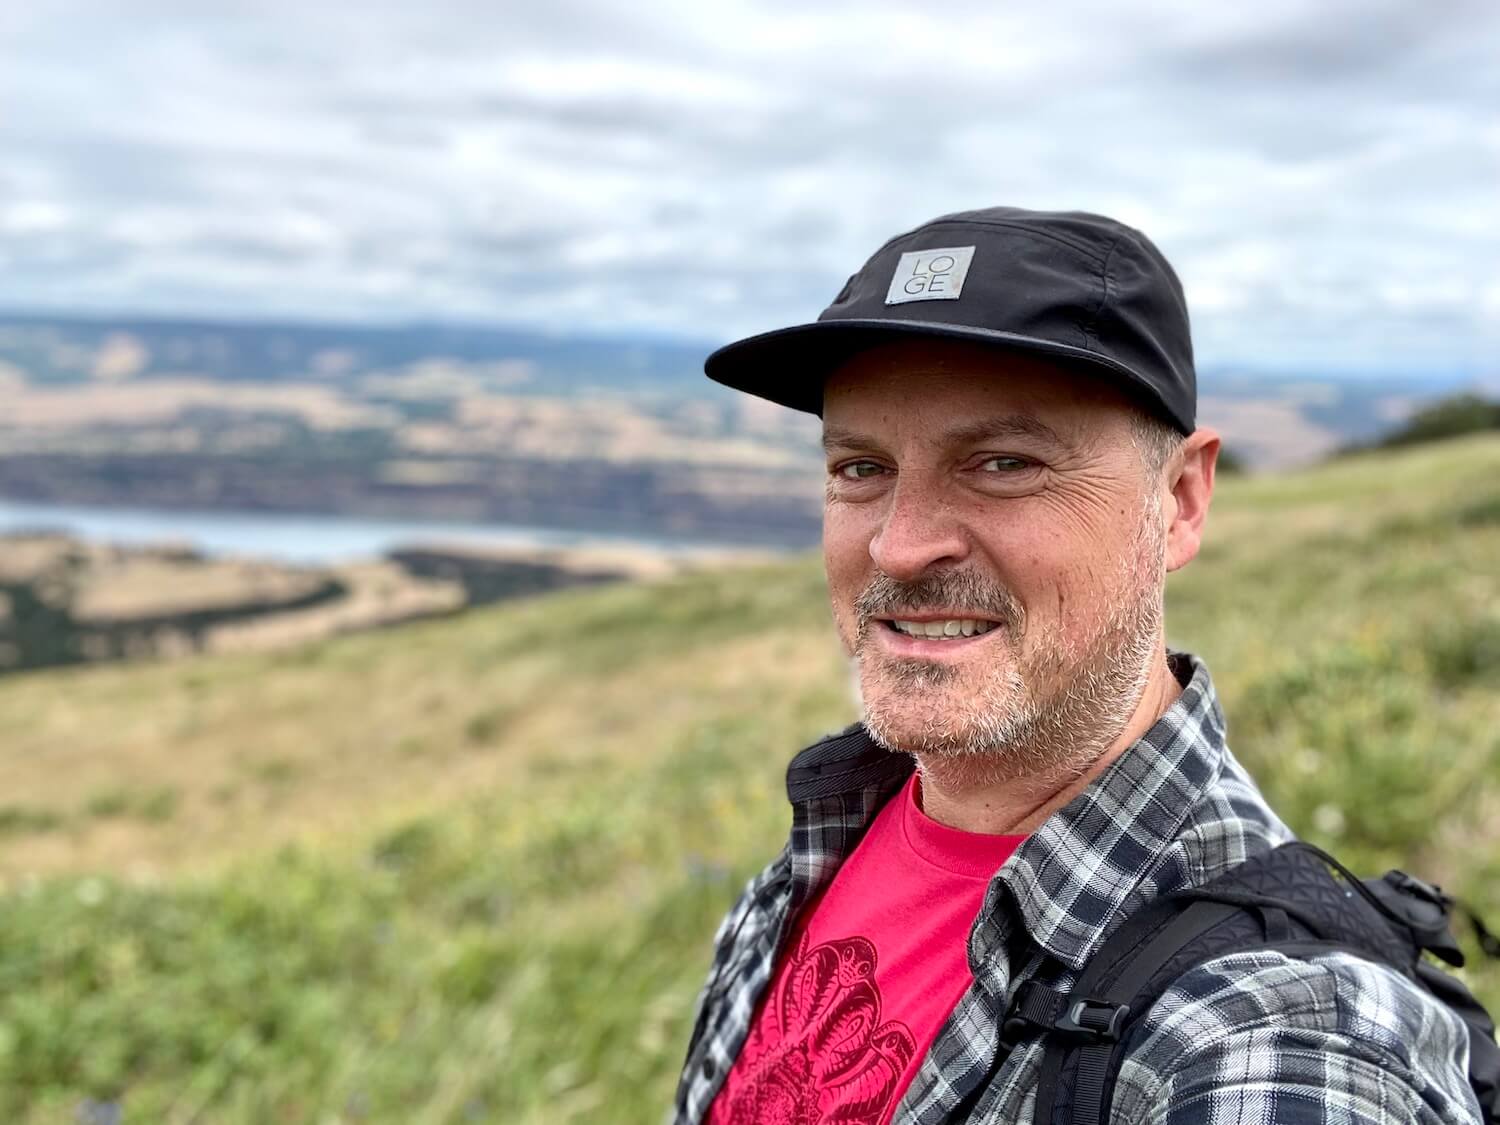 Matthew Kessi smiles for a selfie taken on his Oregon road trip.  He's wearing a bright red shirt covered with a black plaid shirt and a black cap on his head.  The background is out of focus but shows a green grassy meadow leading toward the Columbia River.